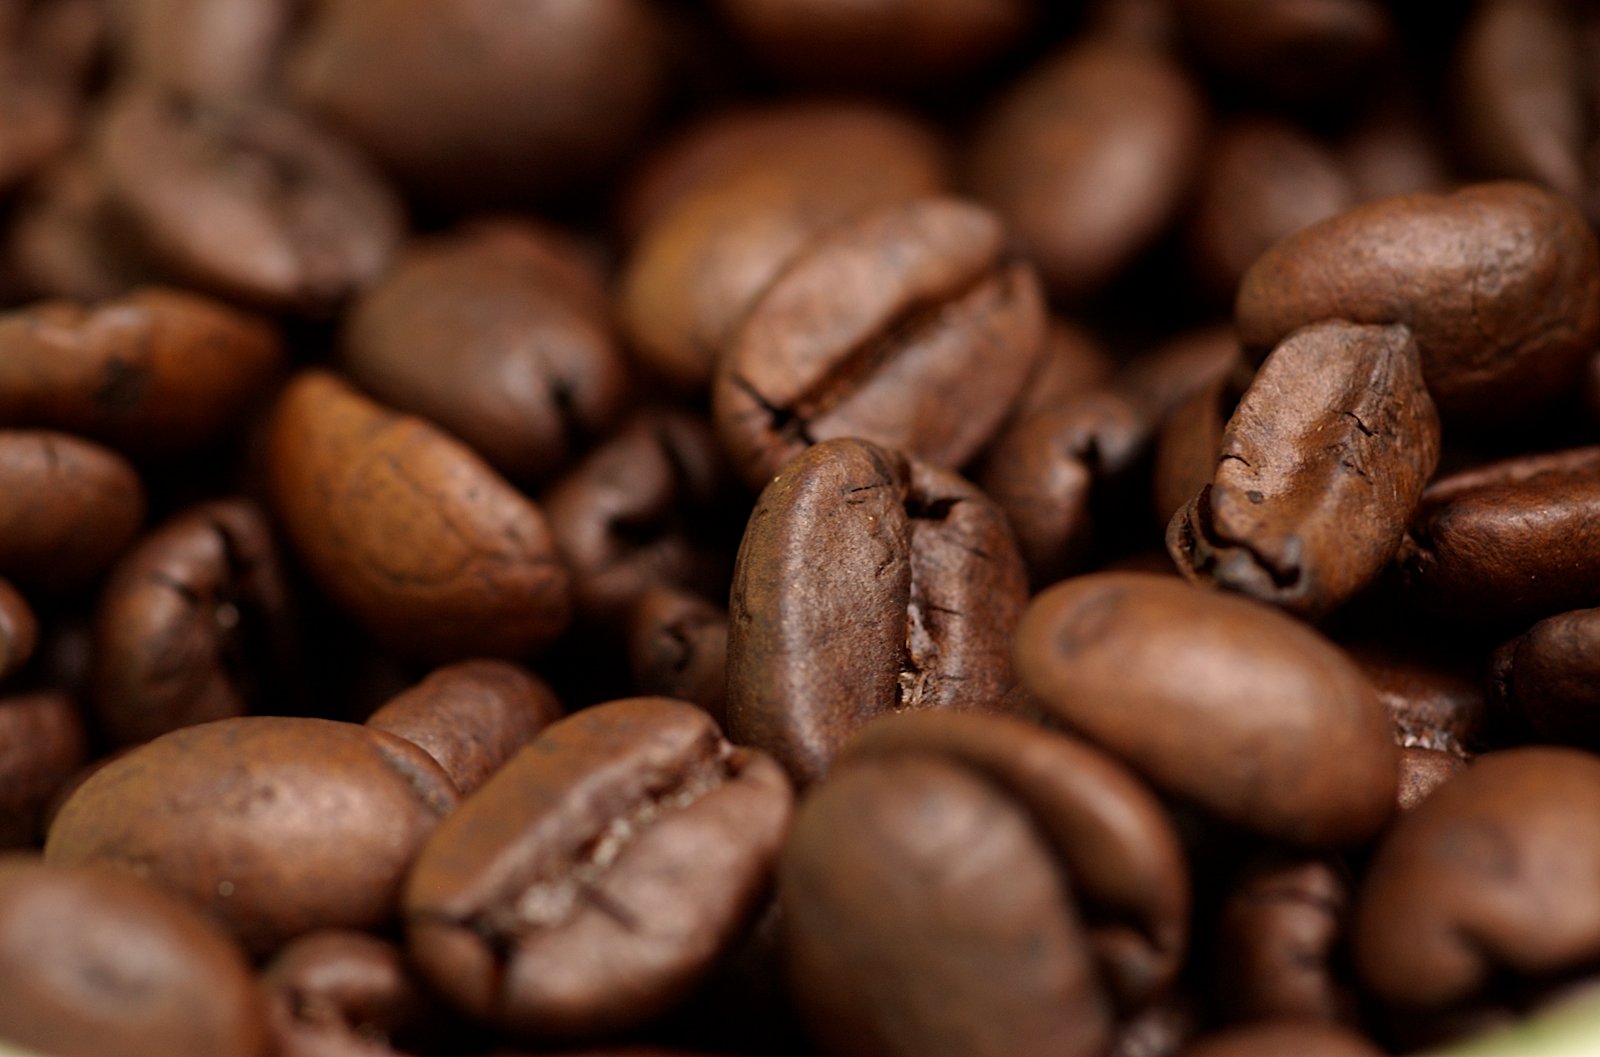 The World’s most expensive coffee now produced in India